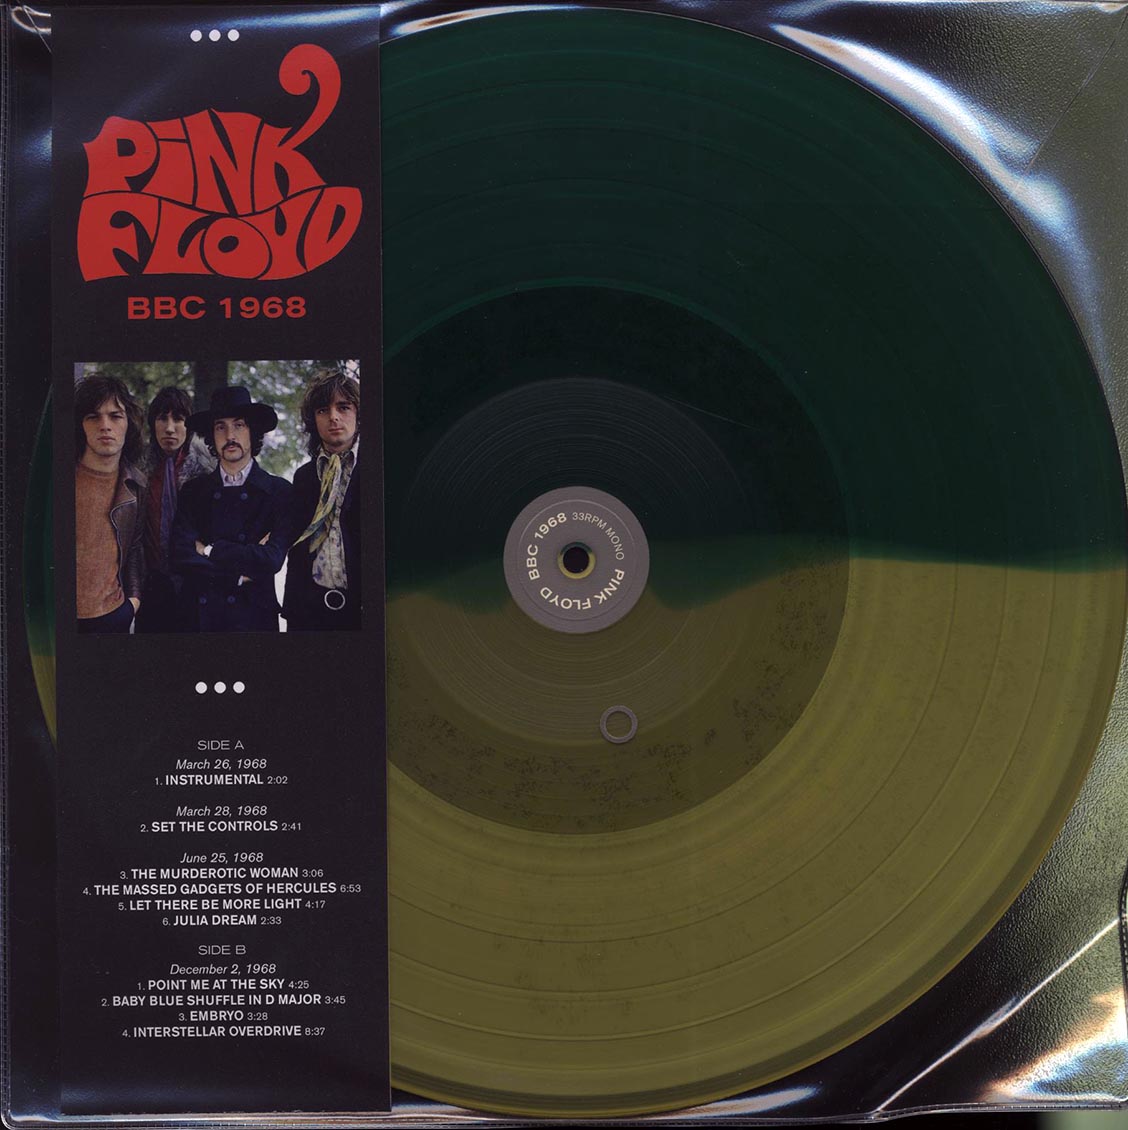 Pink Floyd - BBC 1968 [2019 Unofficial Limited Mono Green] [New Vinyl Record LP]